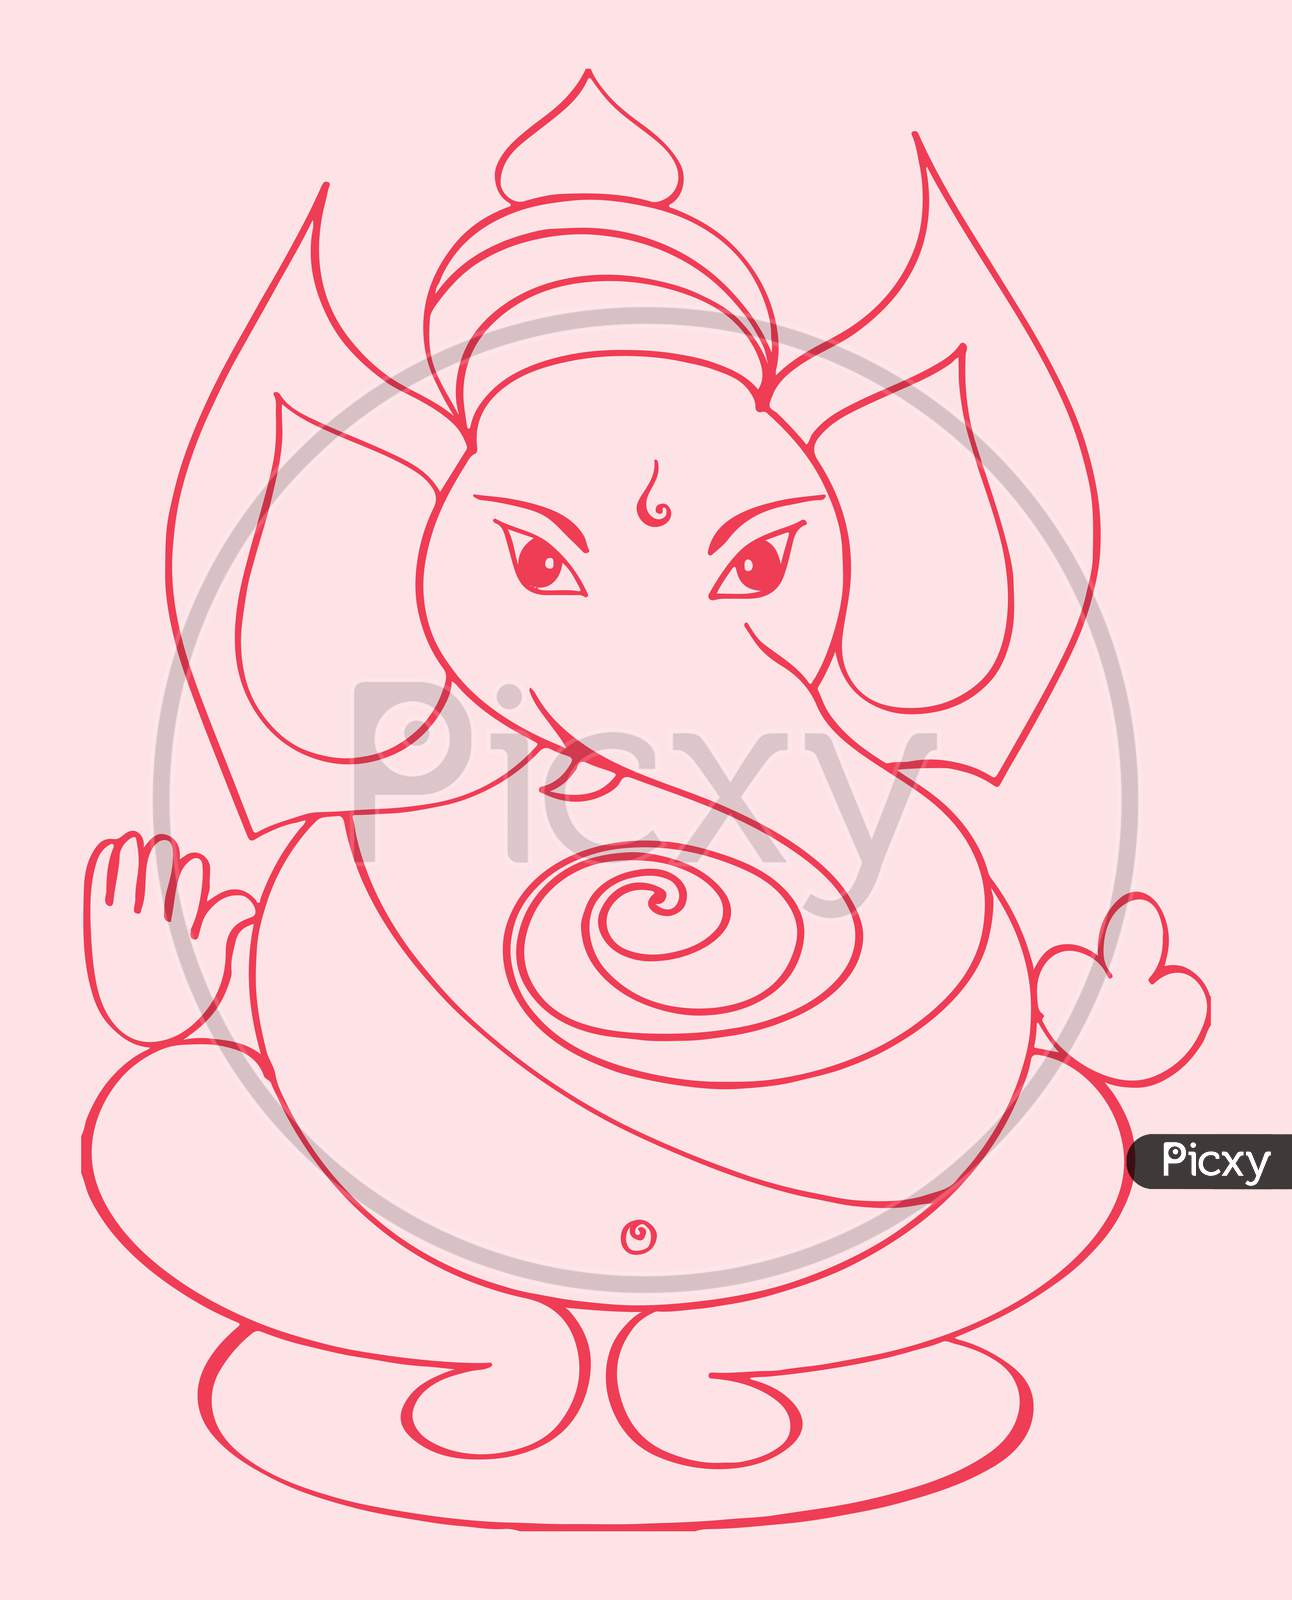 GANESHA DRAWING EASY/GANESH CHATURTHI INDIAN FESTIVAL DRAWING /LORD GANPATI  DRAWING EASY STEPS | Basic drawing, Easy drawings, Clay art projects